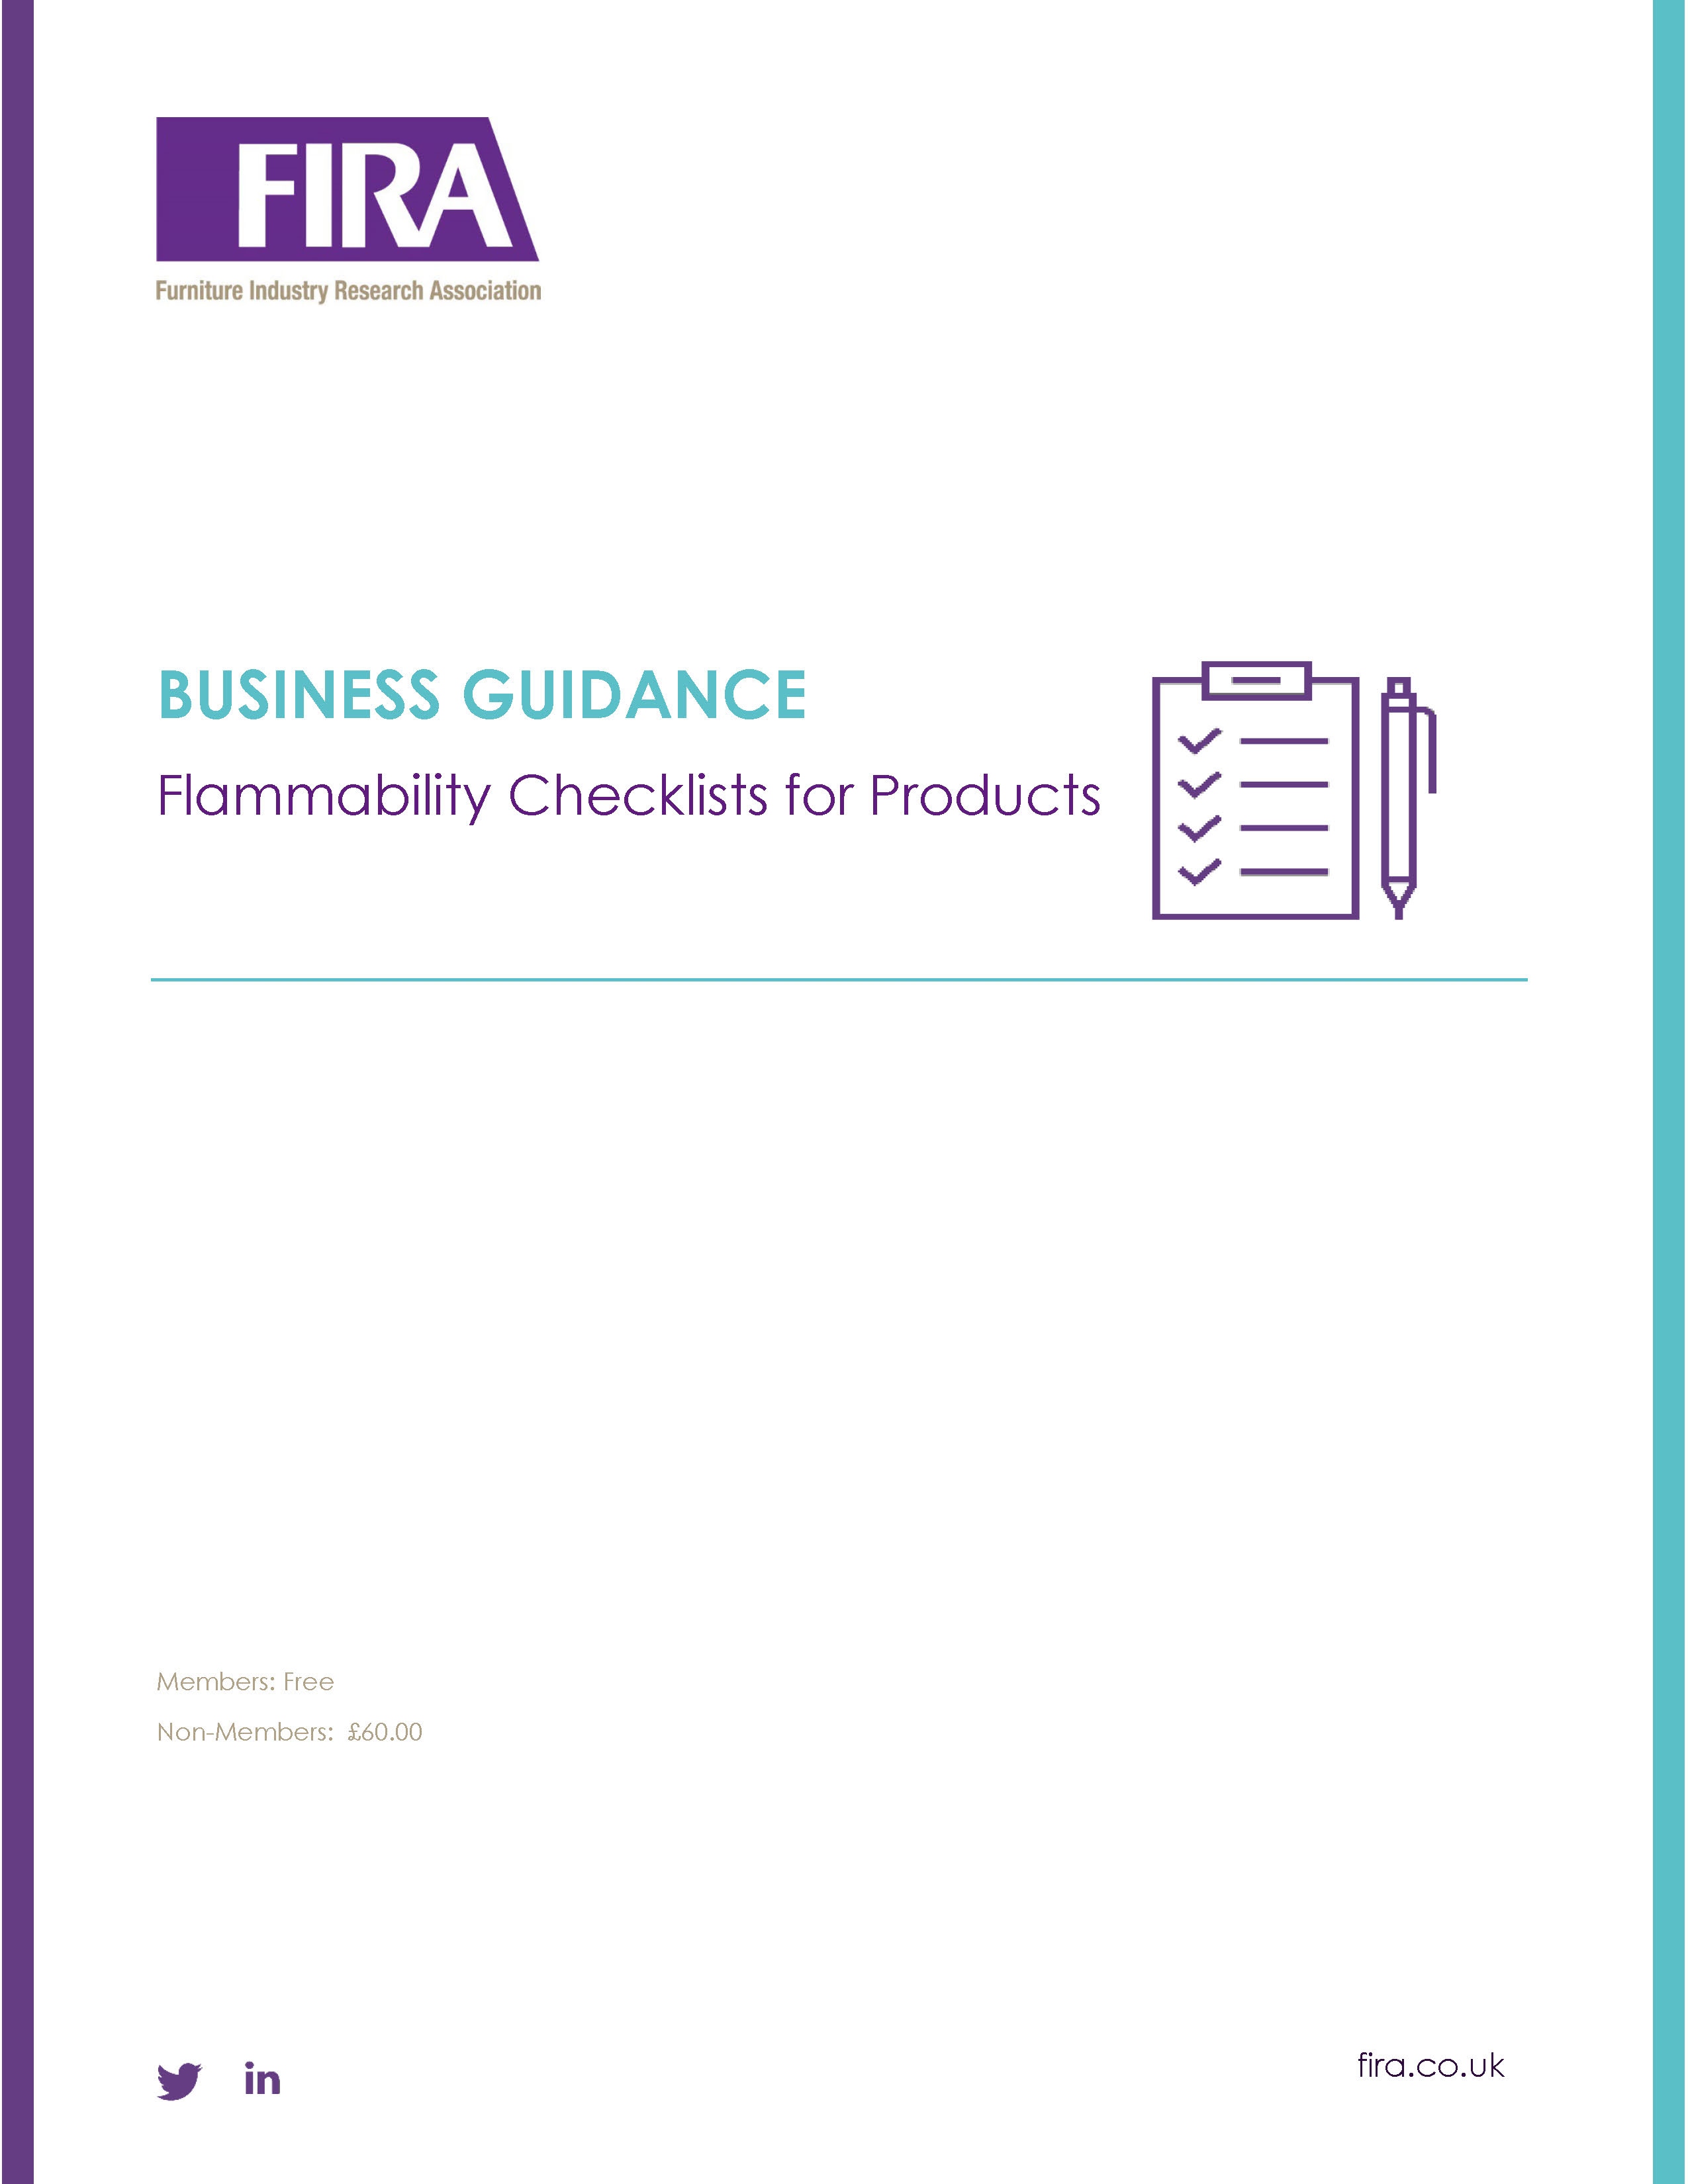 Flammability Checklist for Products Guidance